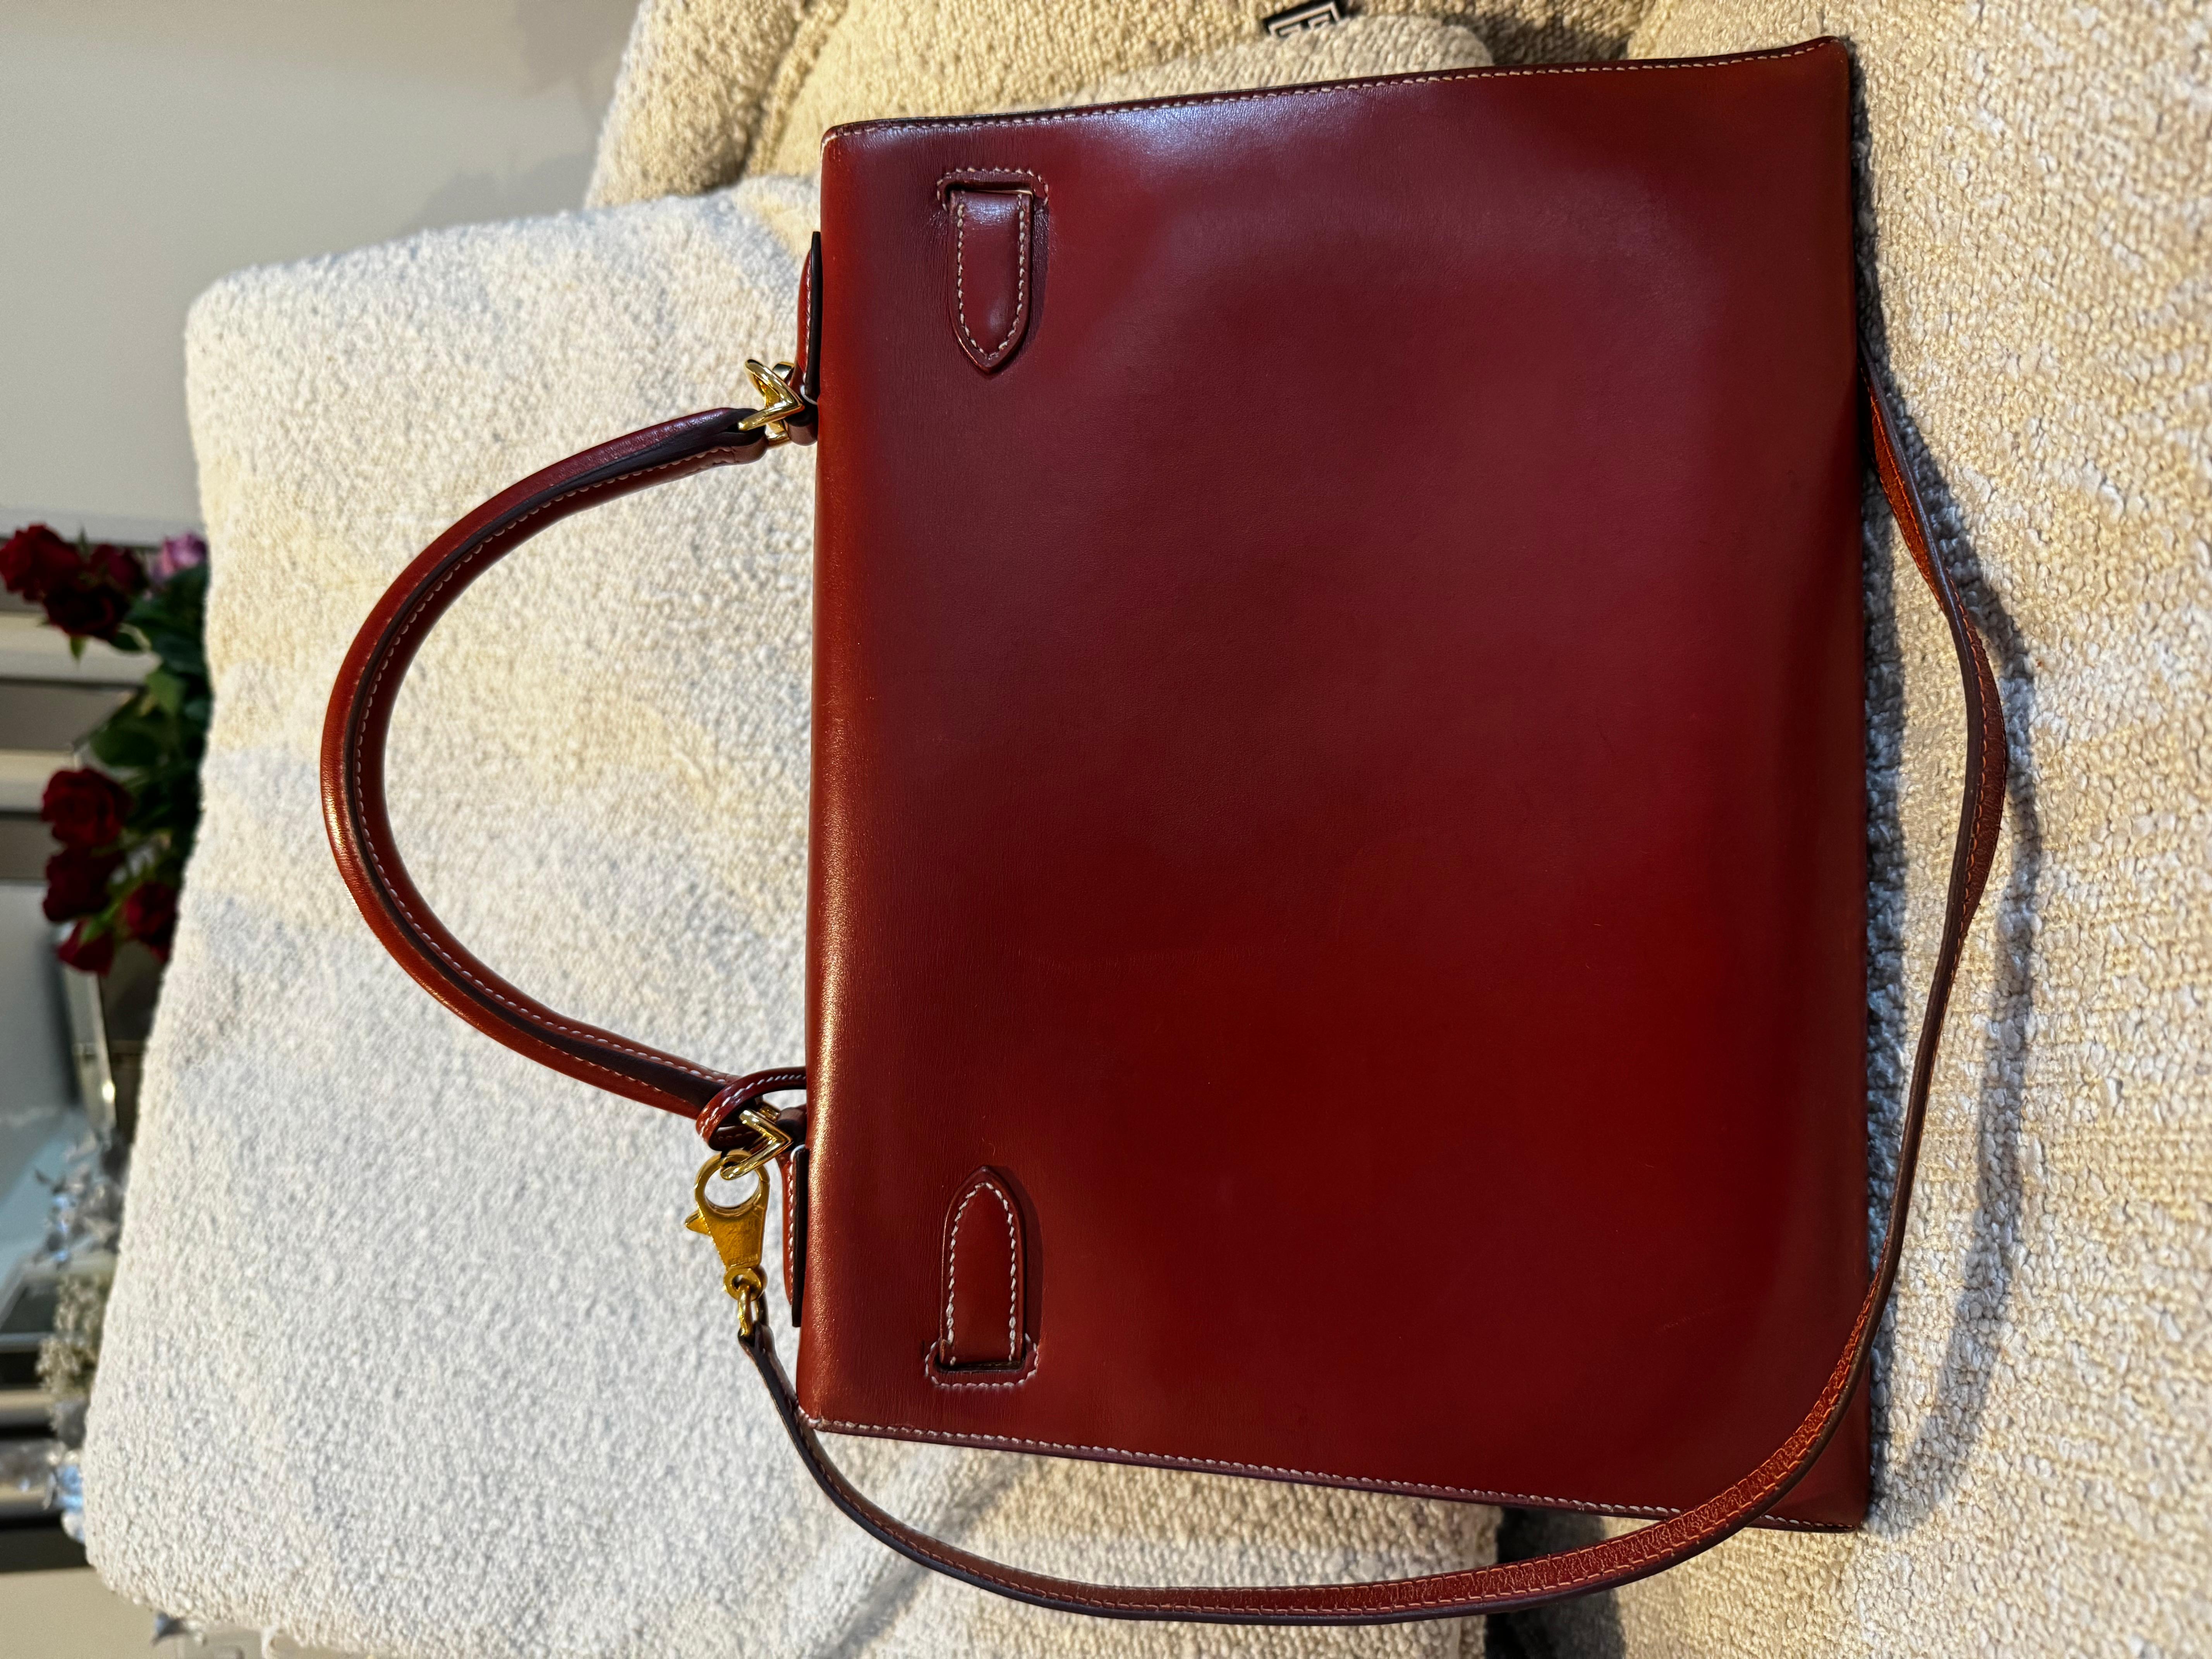 Hermes Kelly 32 Box leather Burgundy bag In Good Condition For Sale In London, England